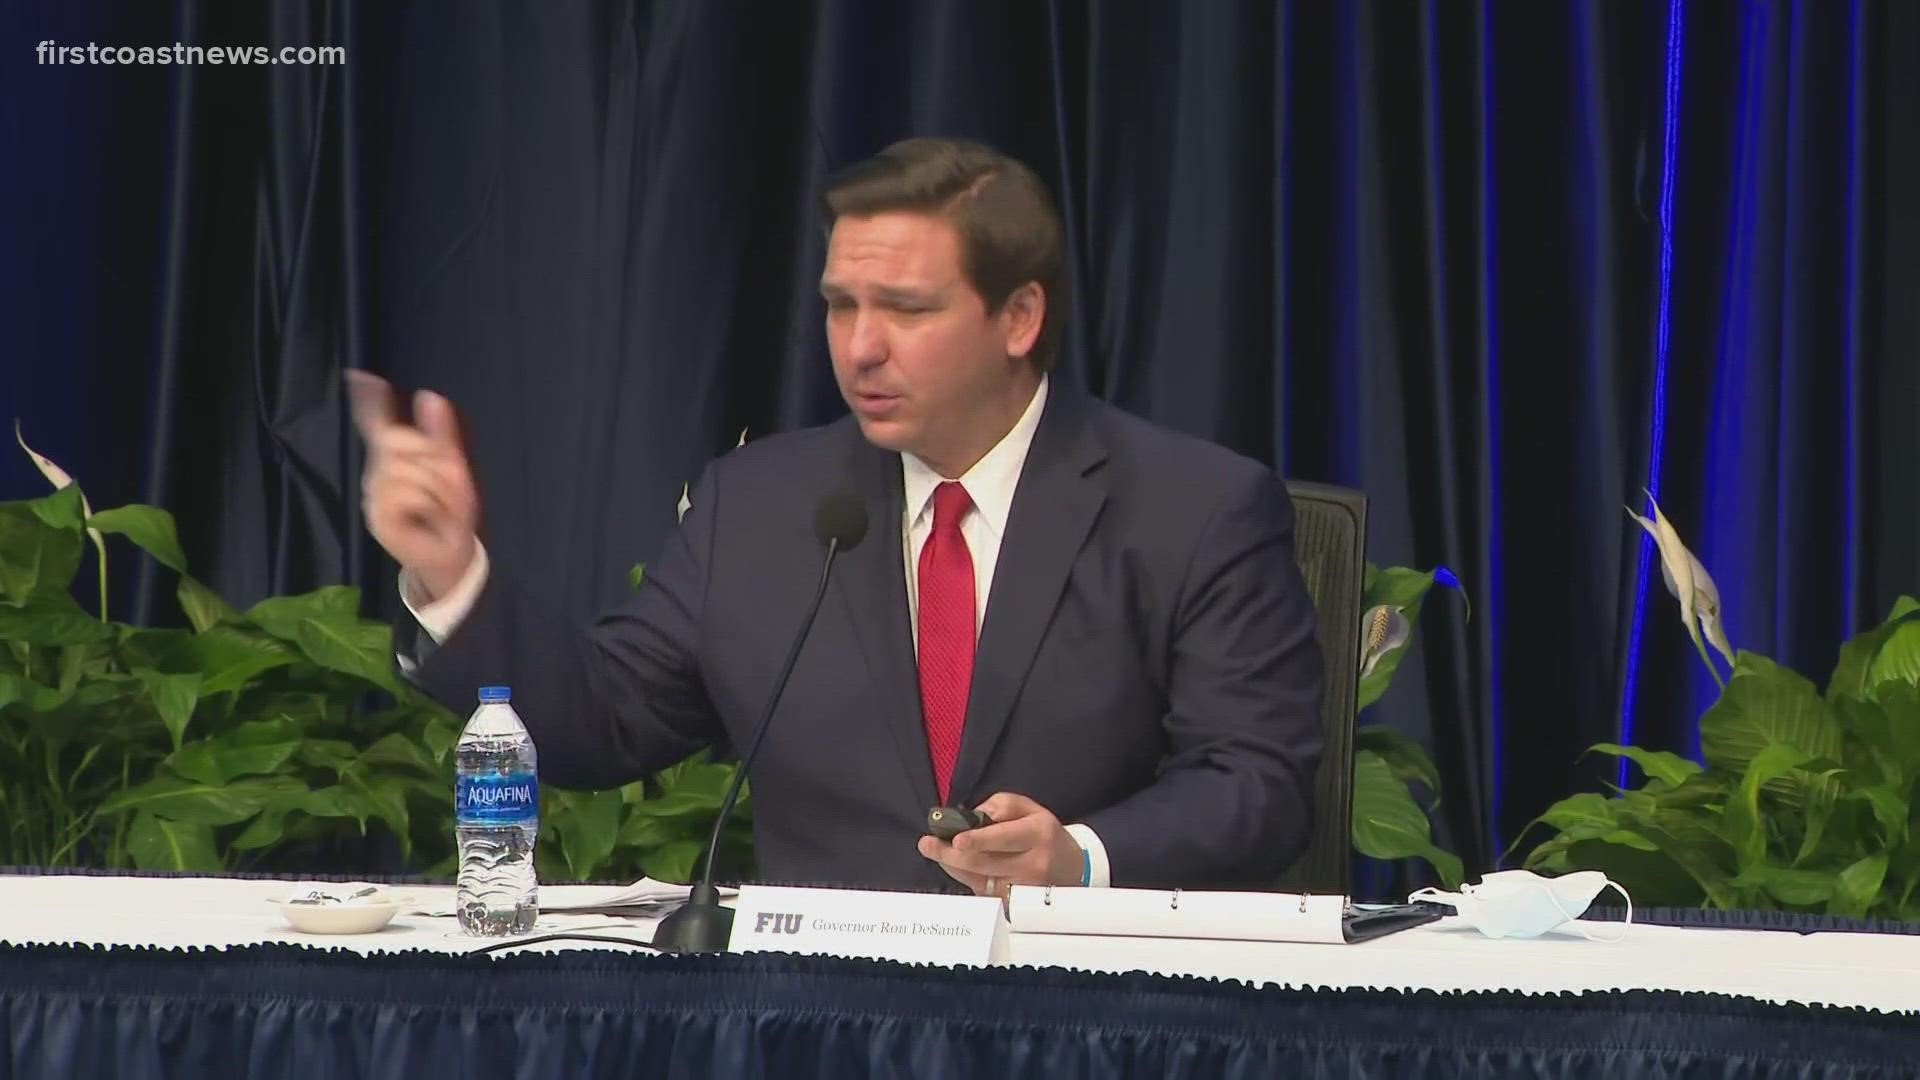 The governor said Florida has now tested 1.5 million people, or one in every 15 Floridians.